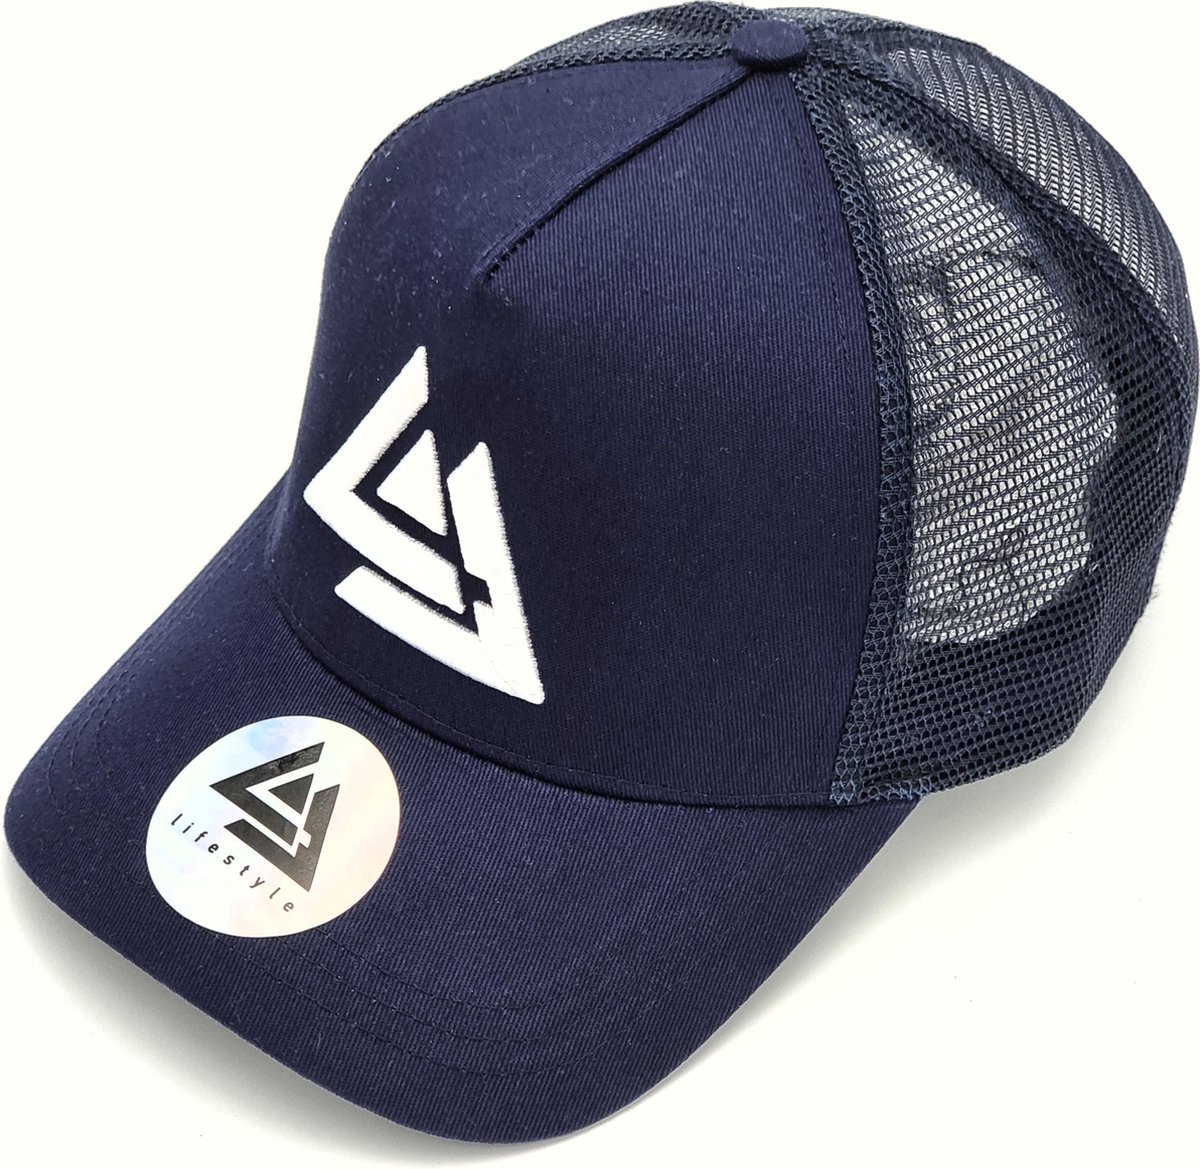 ANGRY ANGELS LIFESTYLE® Retro Trucker Cap Navy Blue - One Size